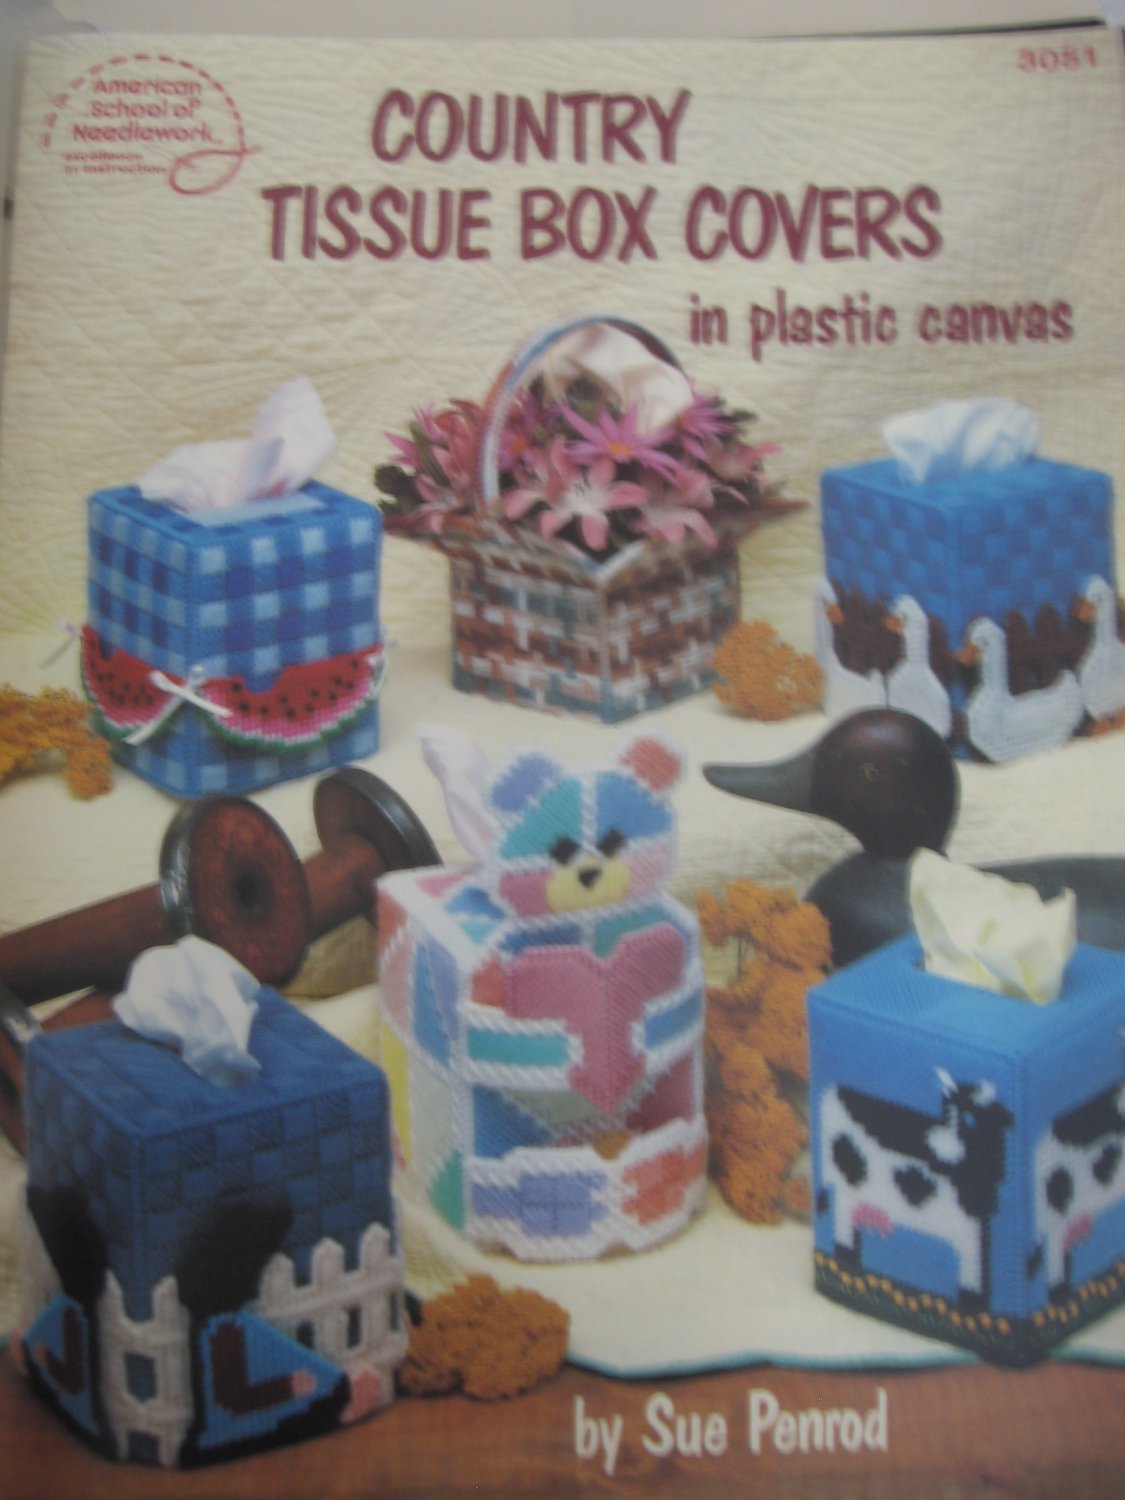 Country Tissue Box Covers in Plastic Canvas By American School of Needlewor...